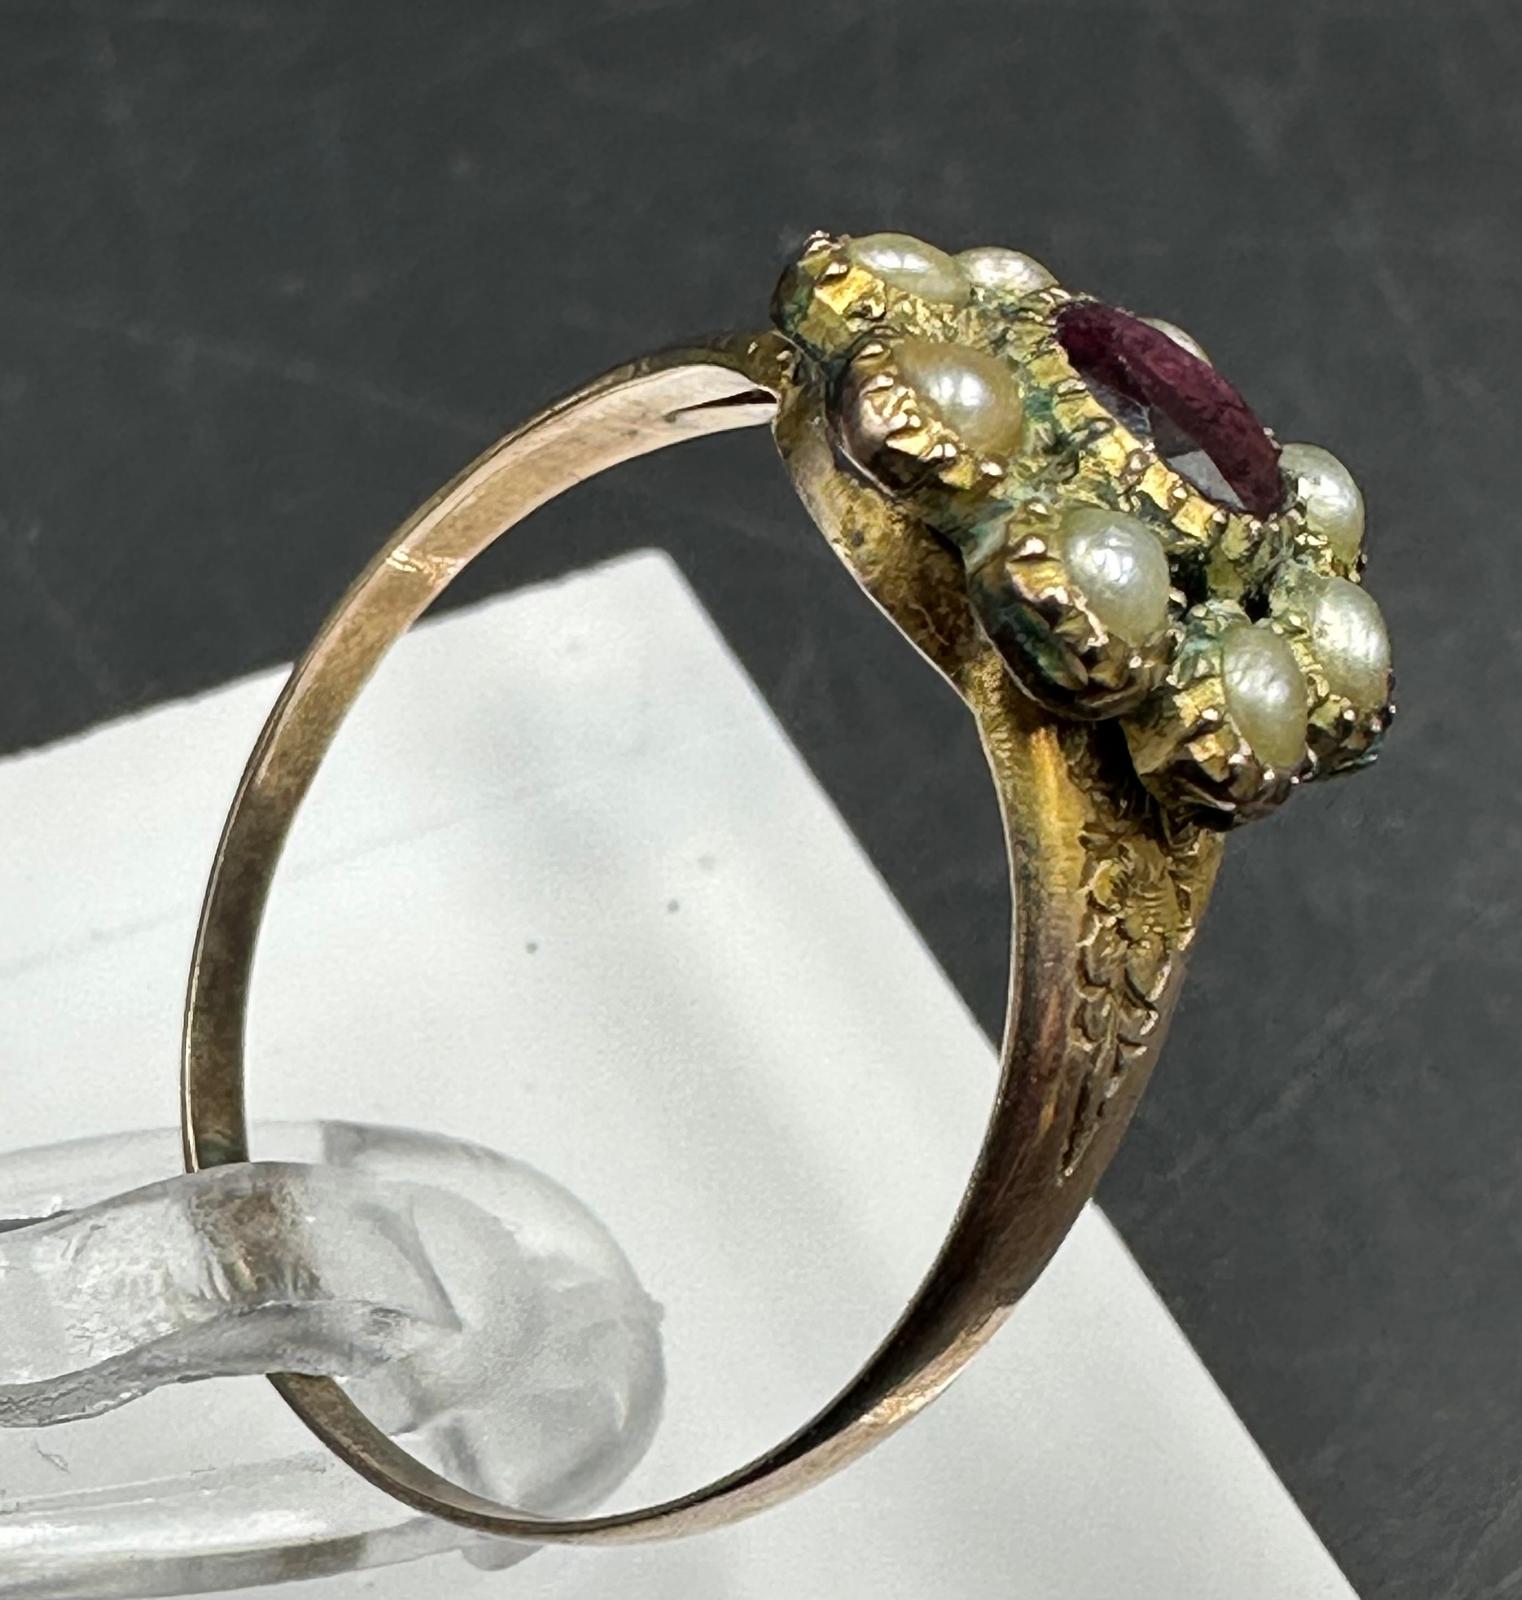 A 9ct gold daisy style ring with central ruby and seed pearls, approximate size Q and weight 2.2g